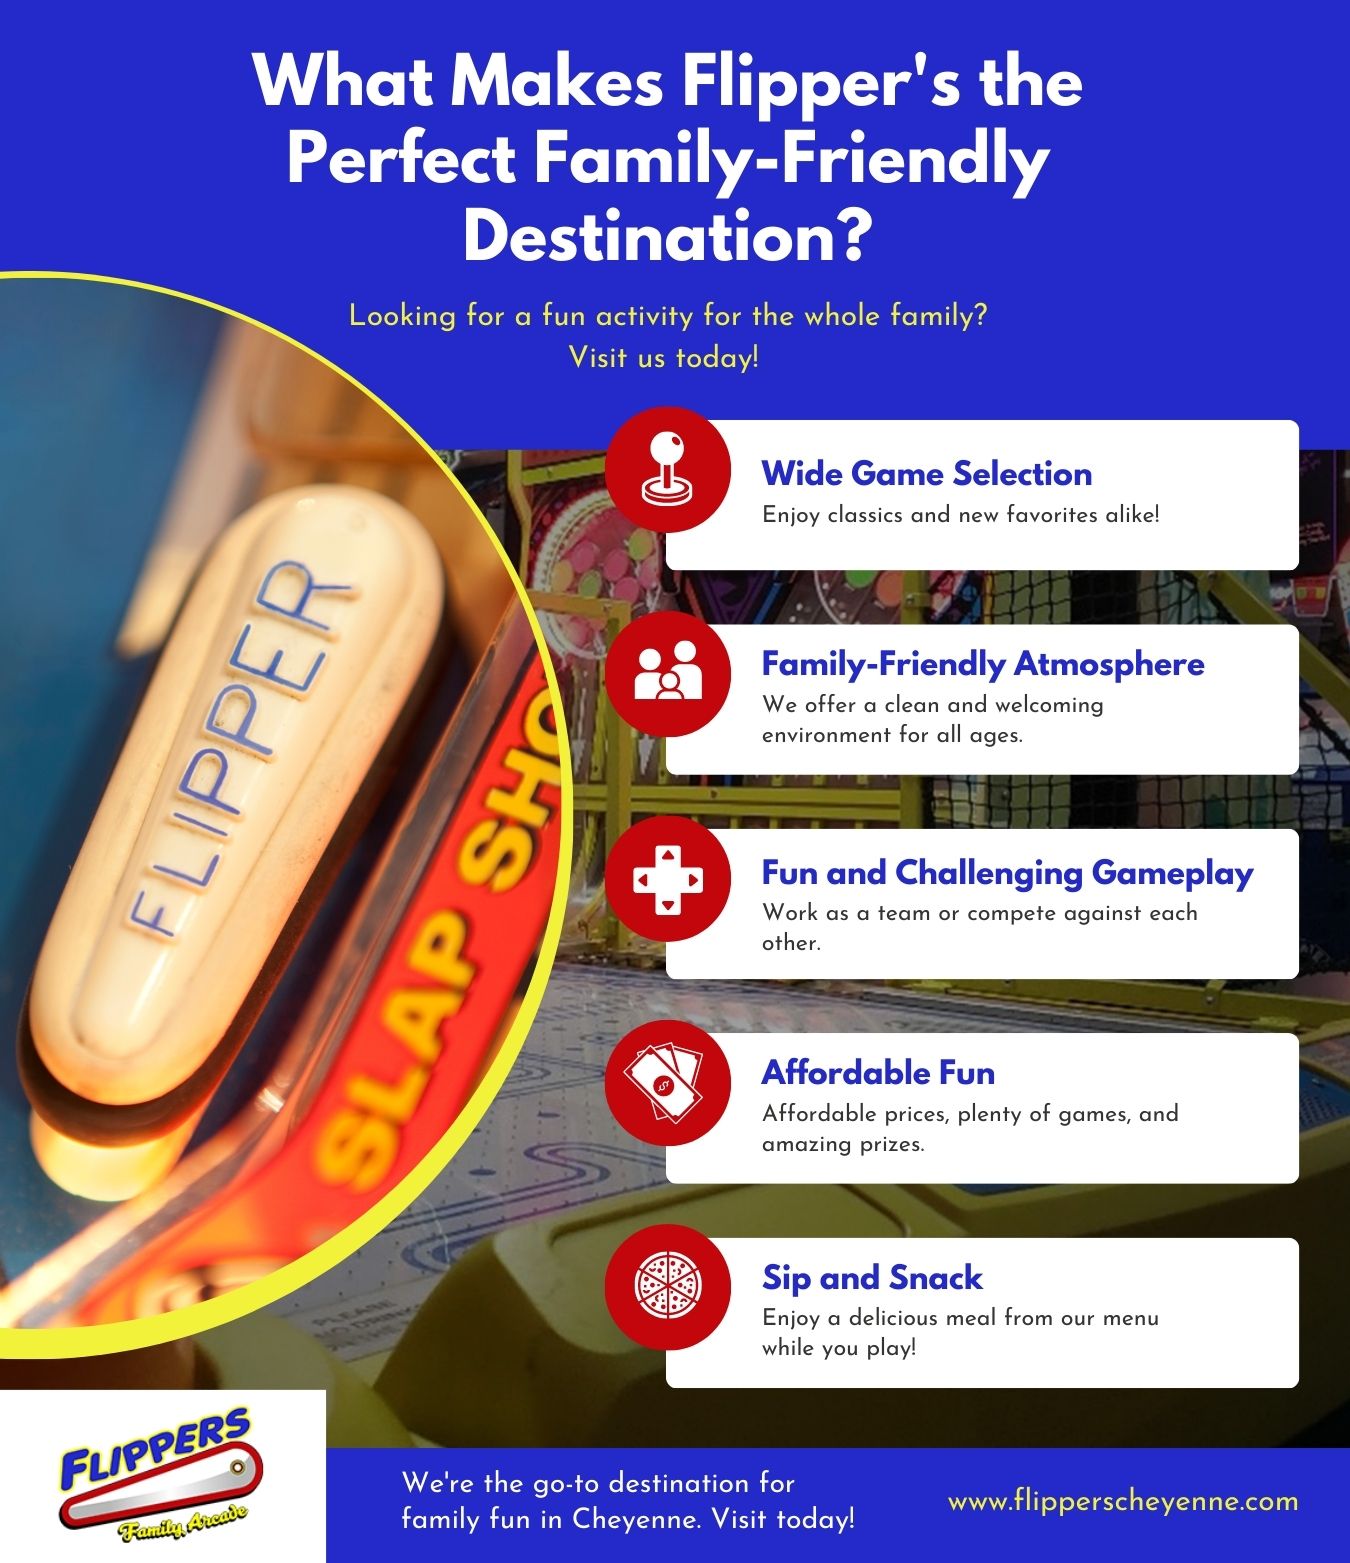 What Makes Flipper's the Perfect Family-Friendly Destination? - Infographic